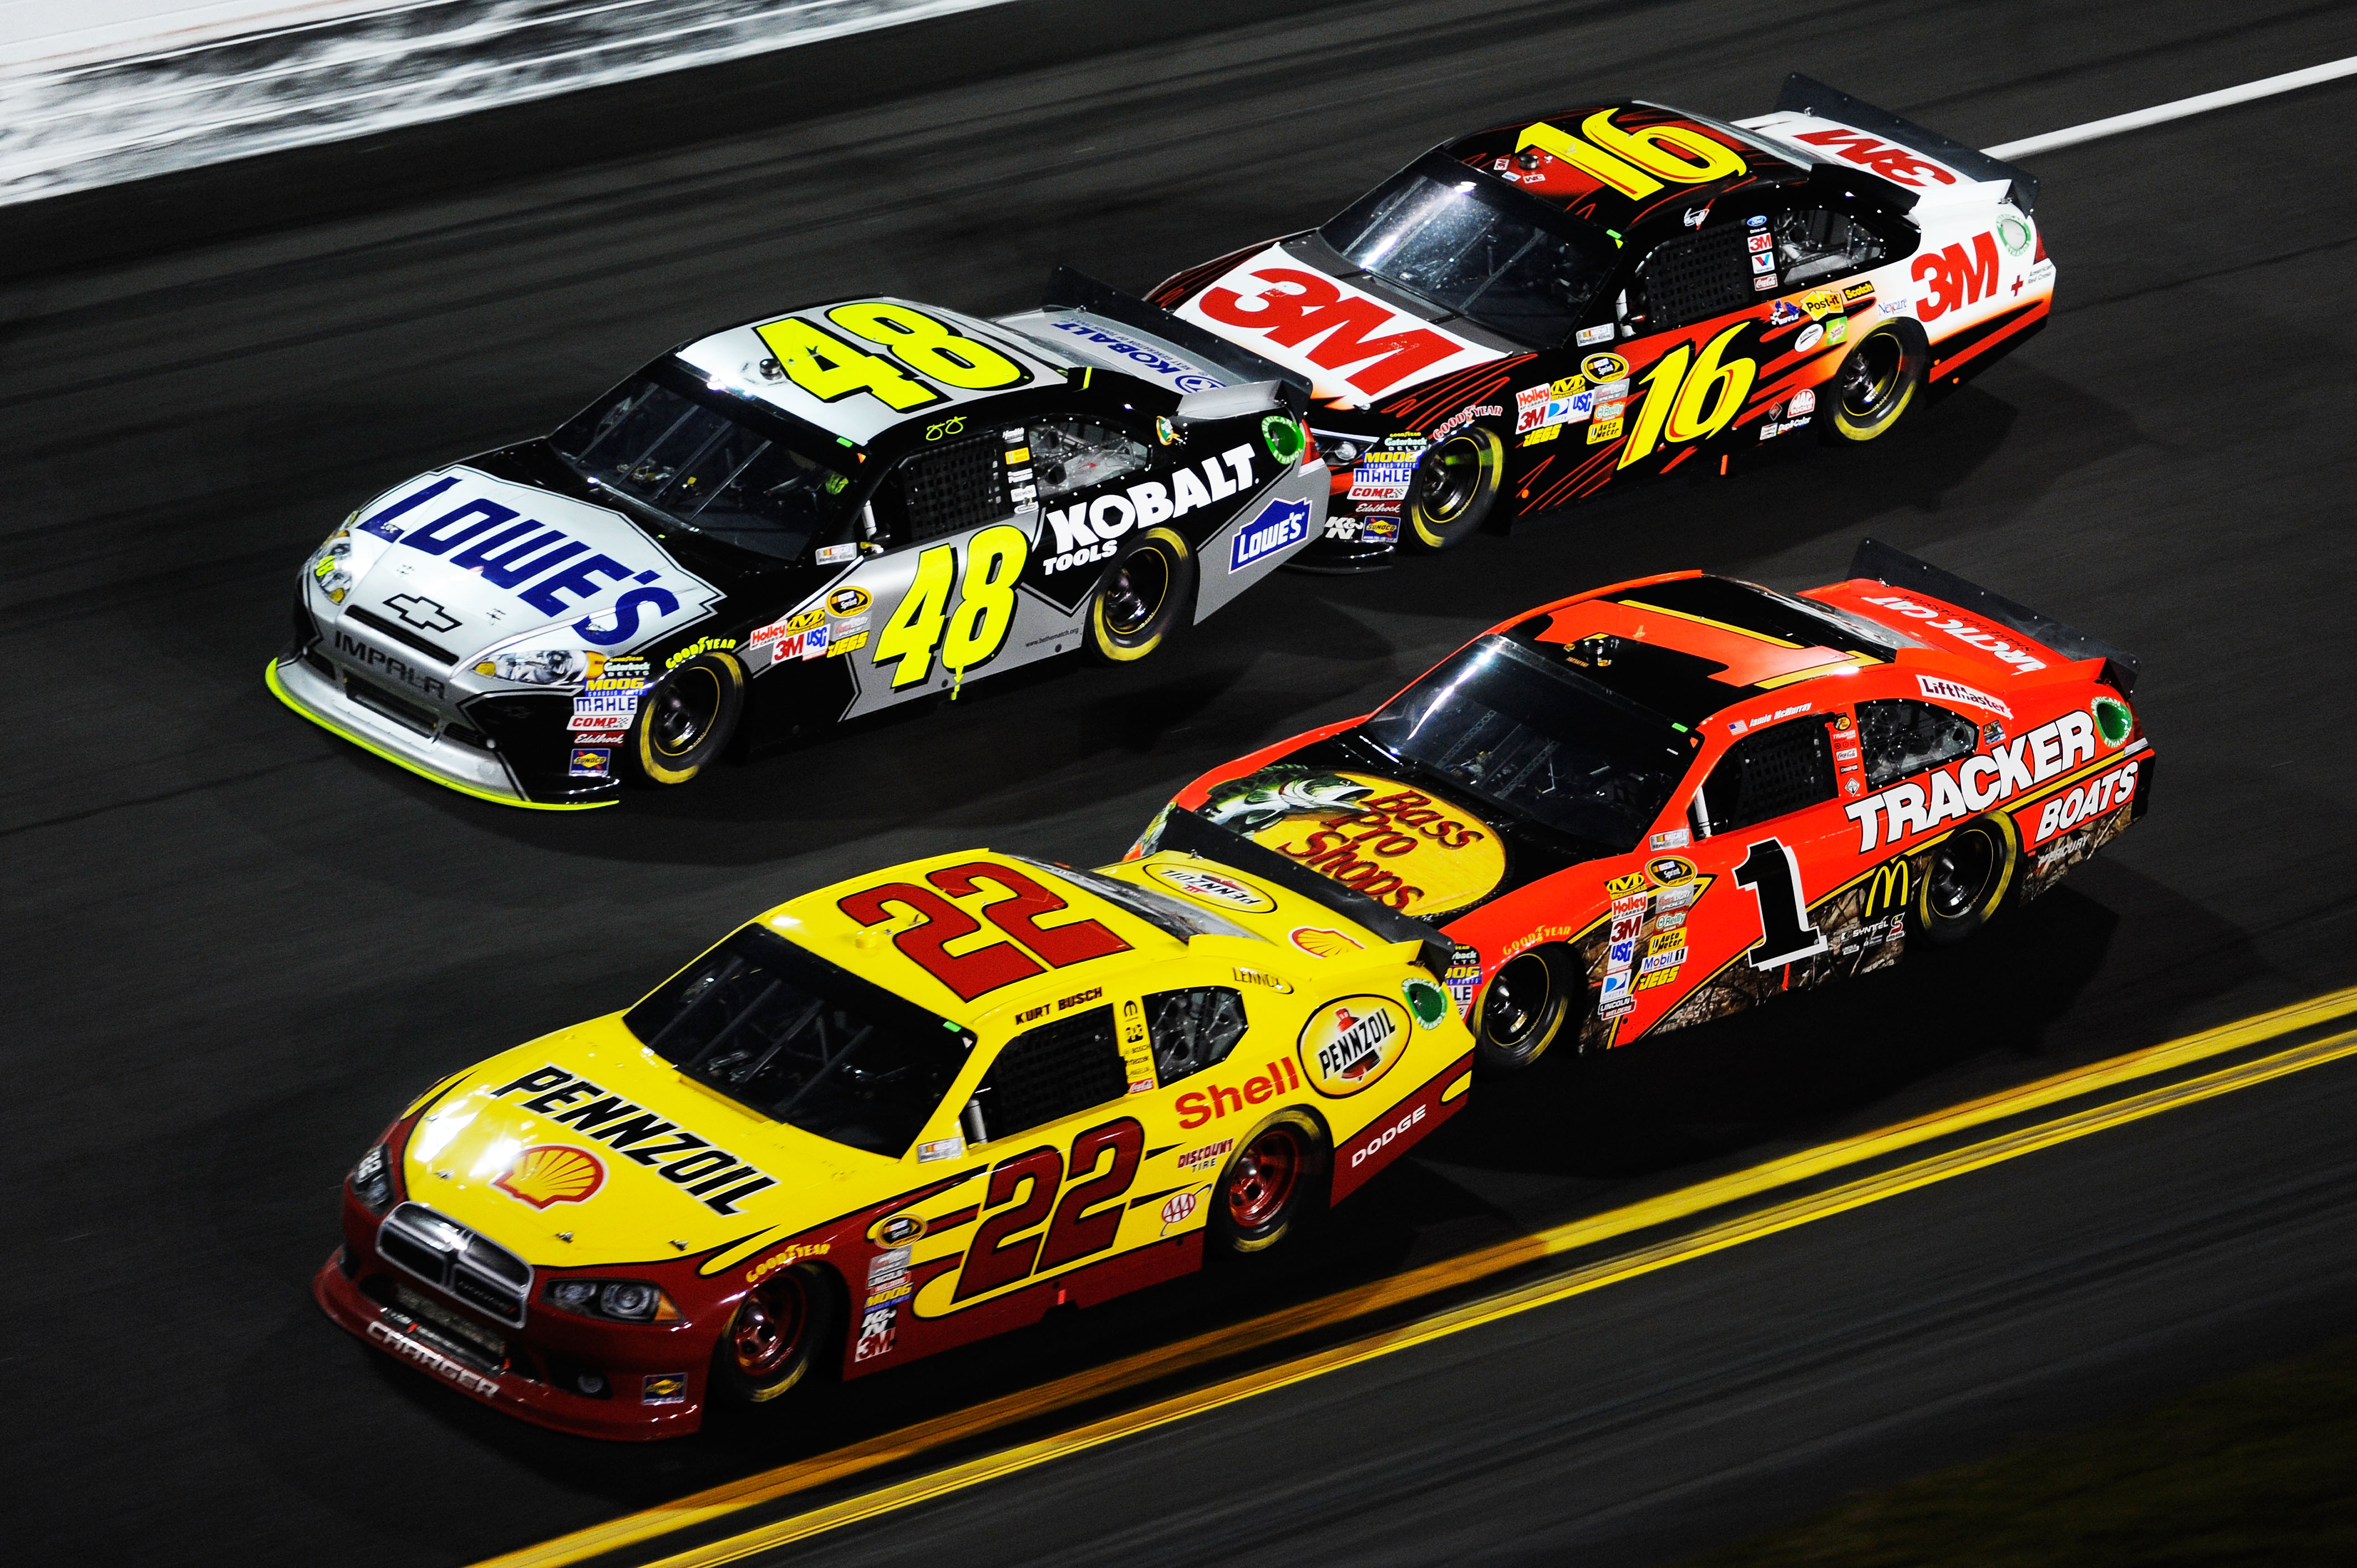 DAYTONA BEACH, FL - FEBRUARY 12:  Kurt Busch, driver of the #22 Shell/Pennzoil Dodge, Jimmie Johnson, driver of the #48 Lowe's Chevrolet, Jamie McMurray, driver of the #1 Bass Pro Shops Chevrolet, and Greg Biffle, driver of the #16 3M Ford, race during th